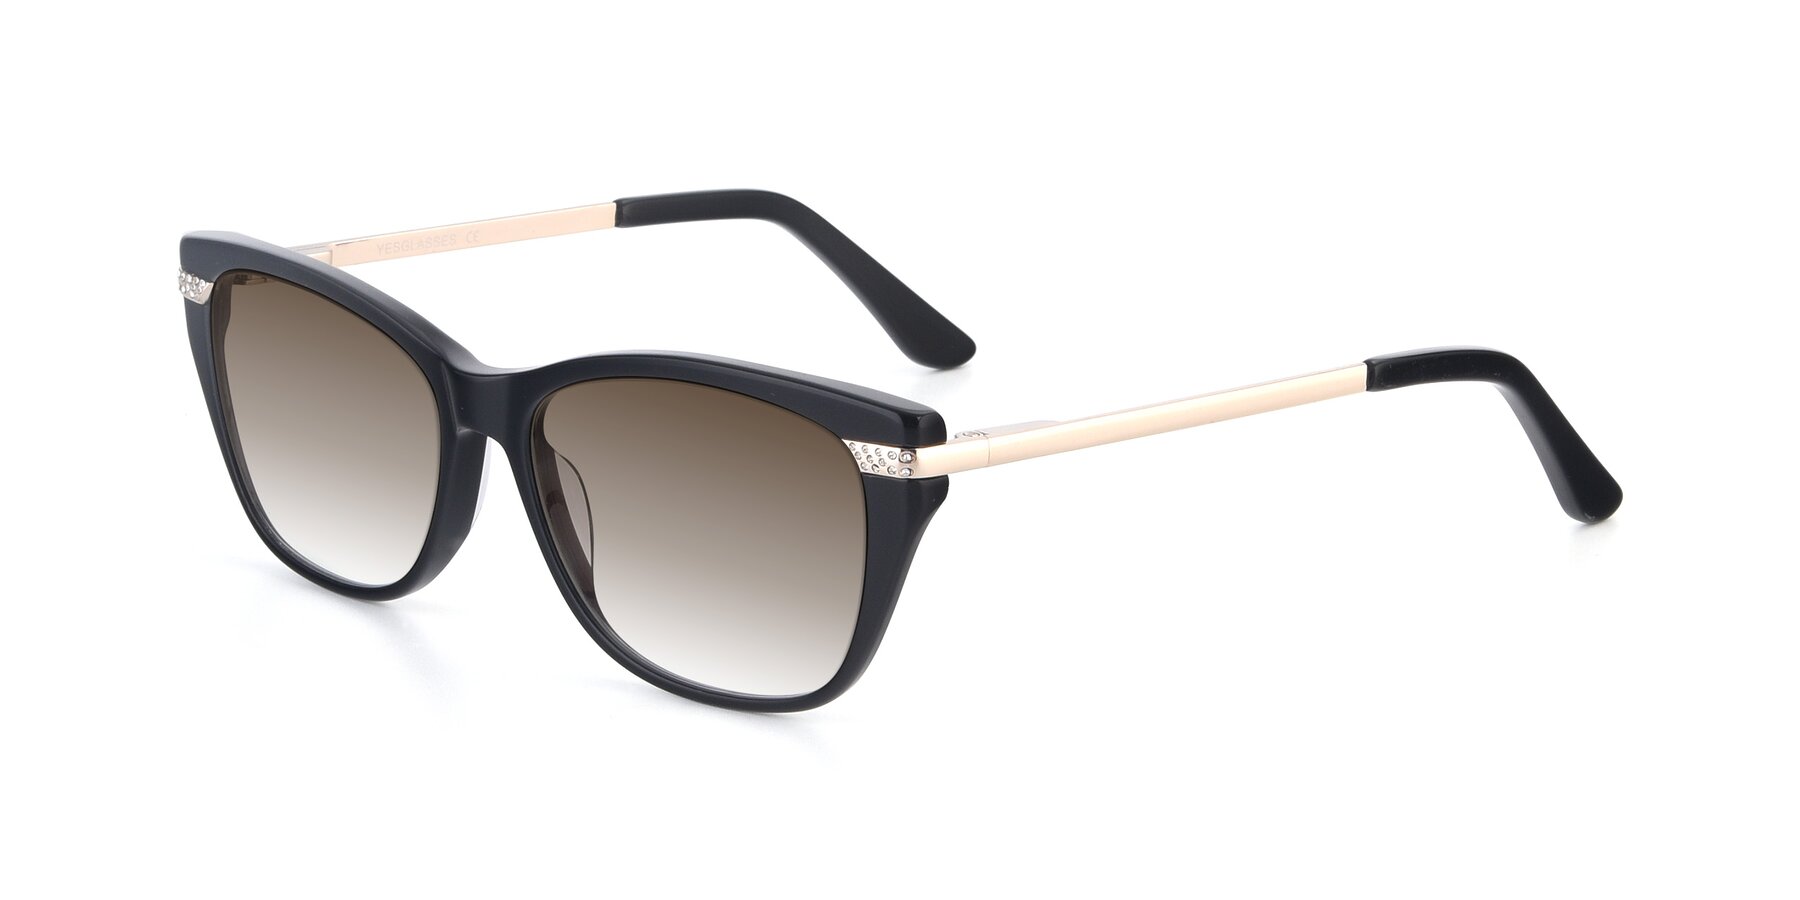 Angle of 17515 in Black with Brown Gradient Lenses